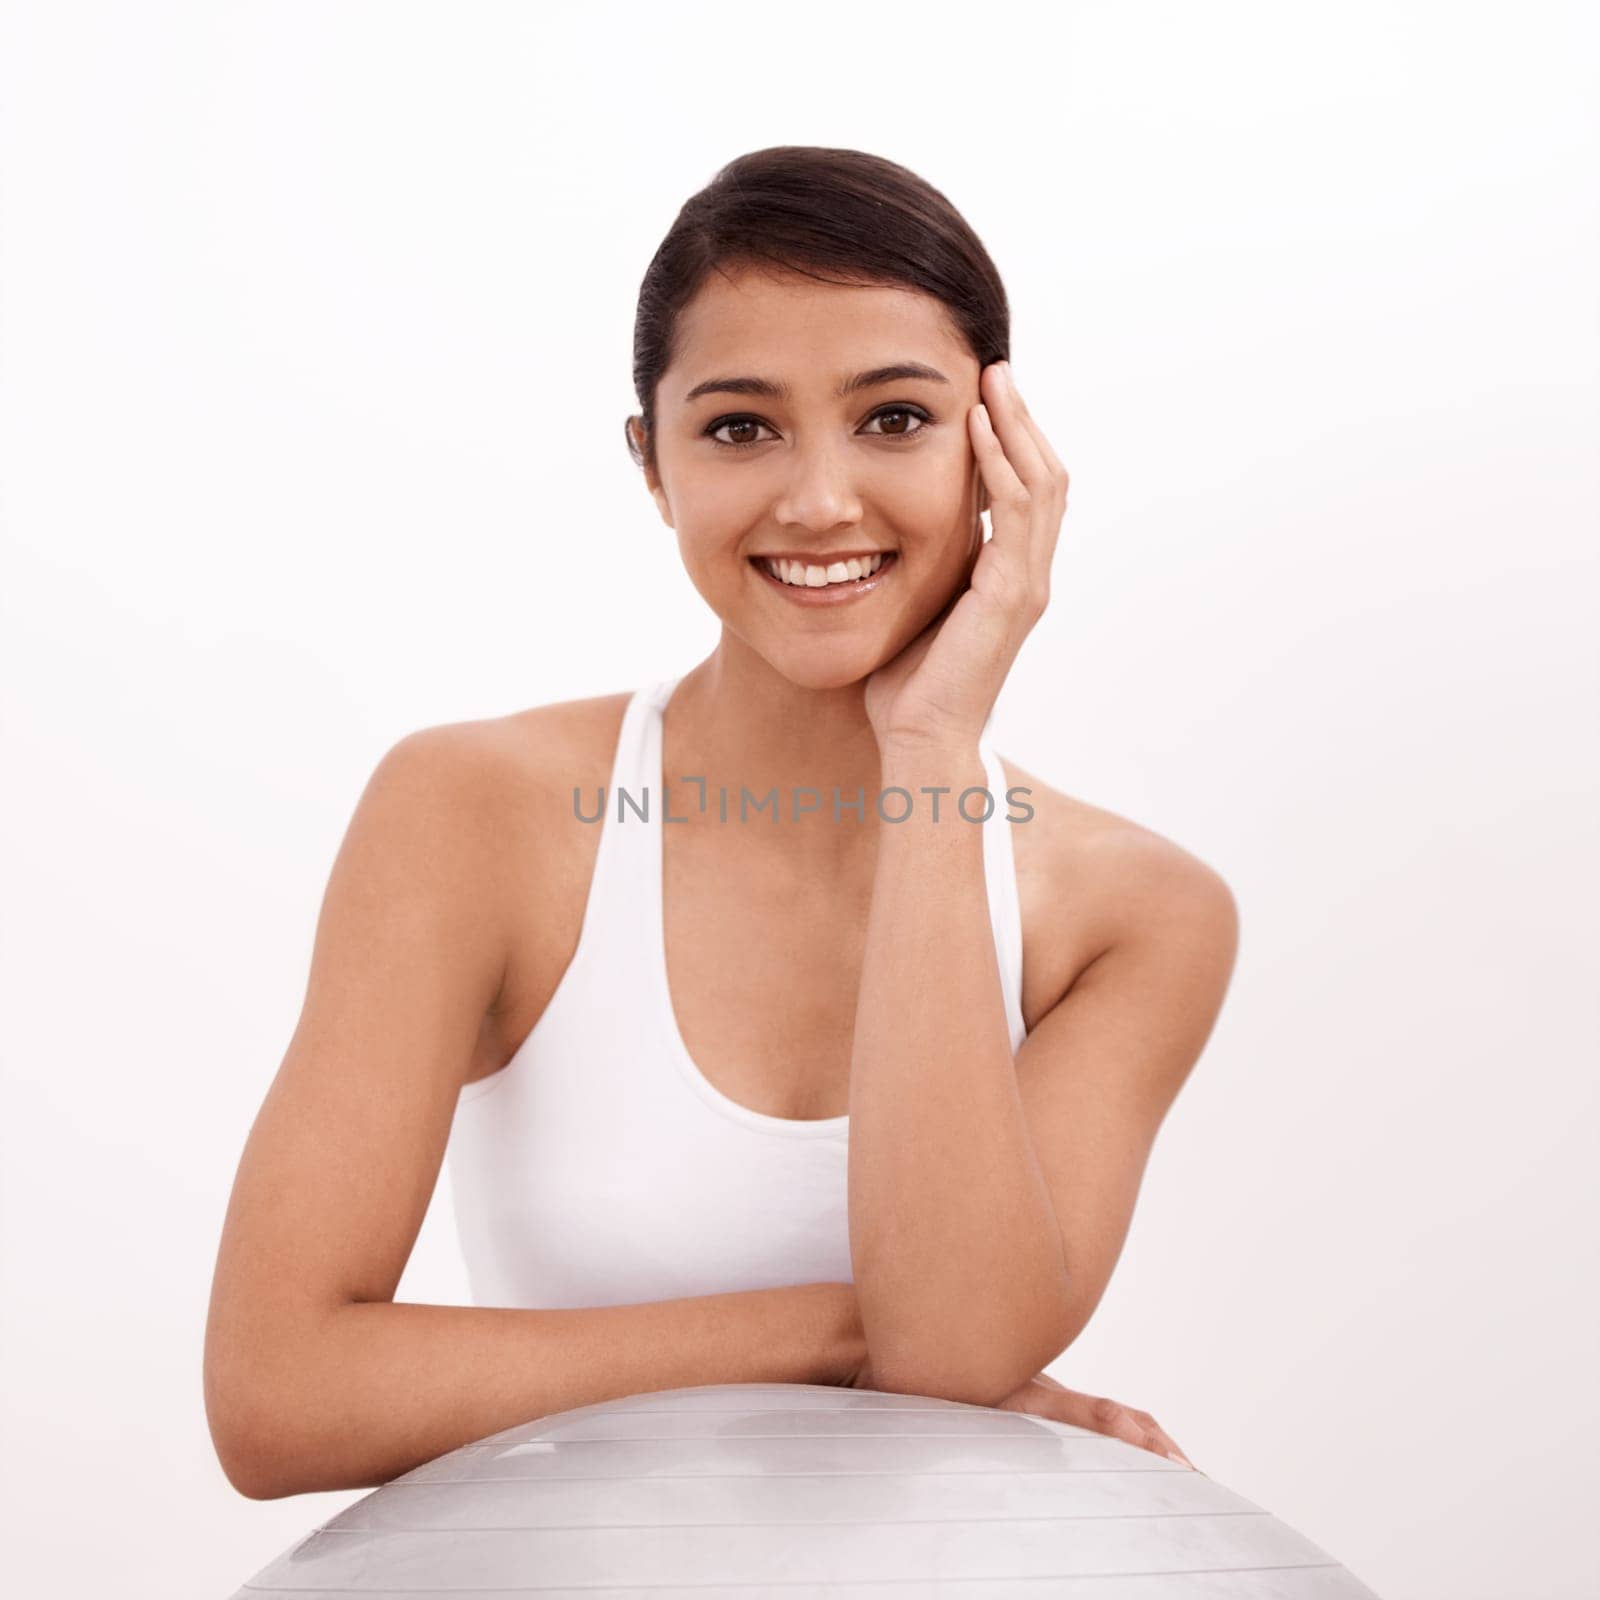 This ball is great for pilates. Portrait of a young woman sitting with a pilates ball